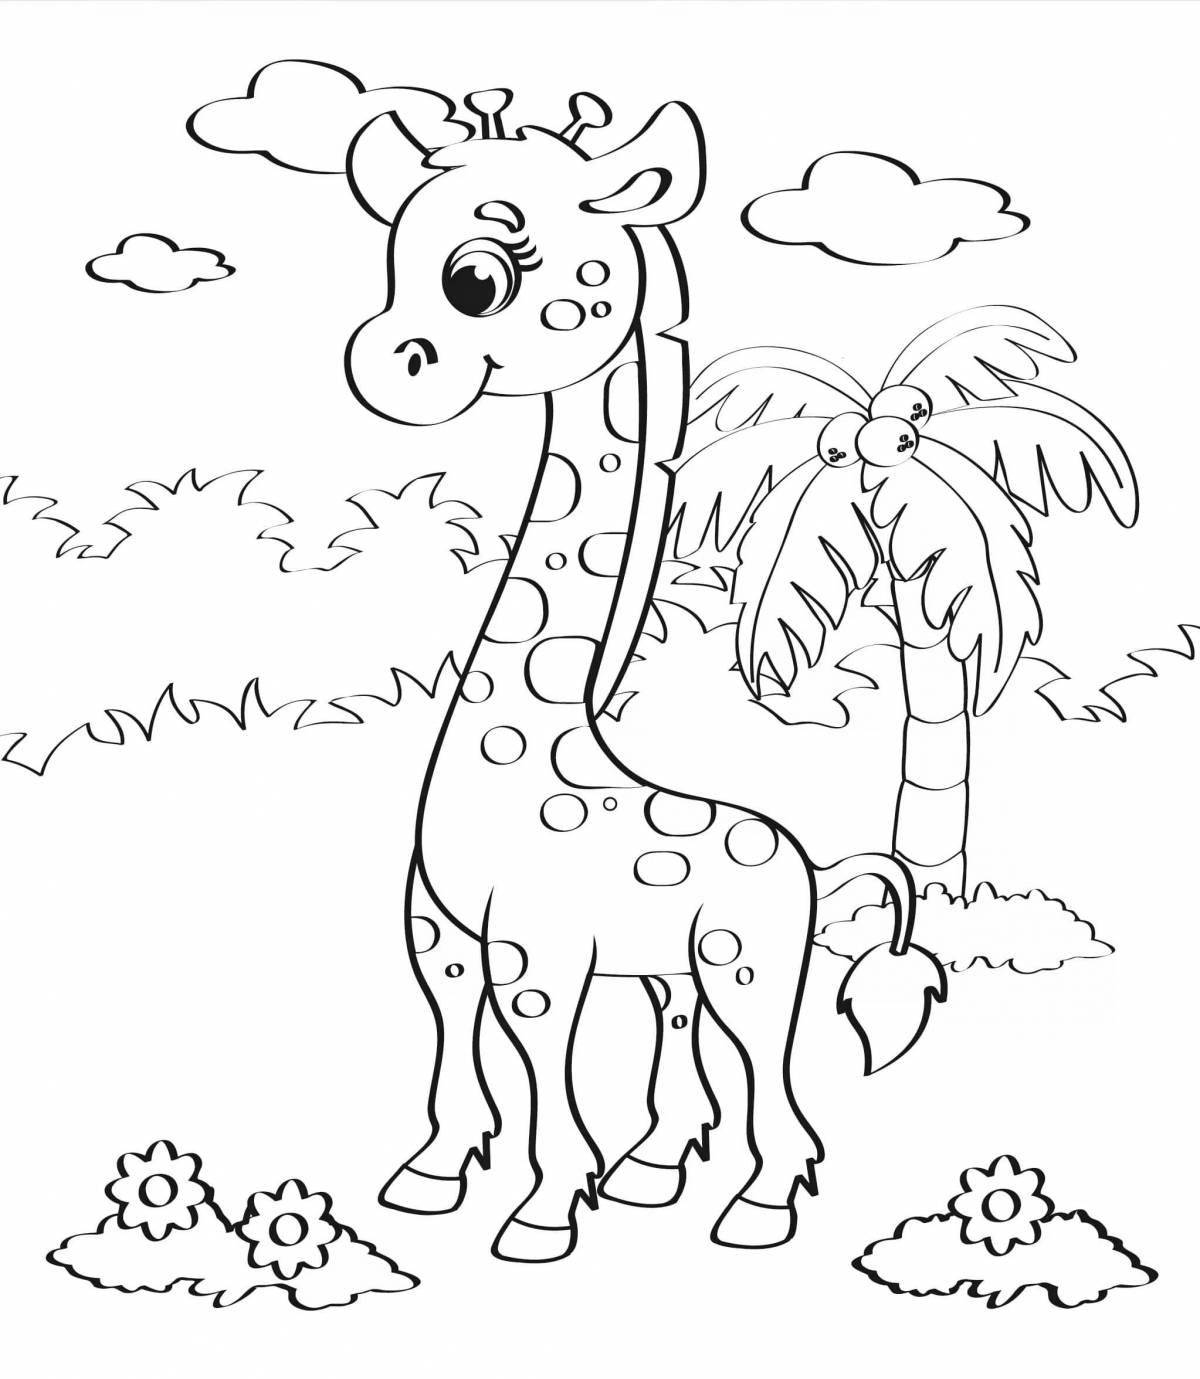 Fun coloring book for 5-6 year olds